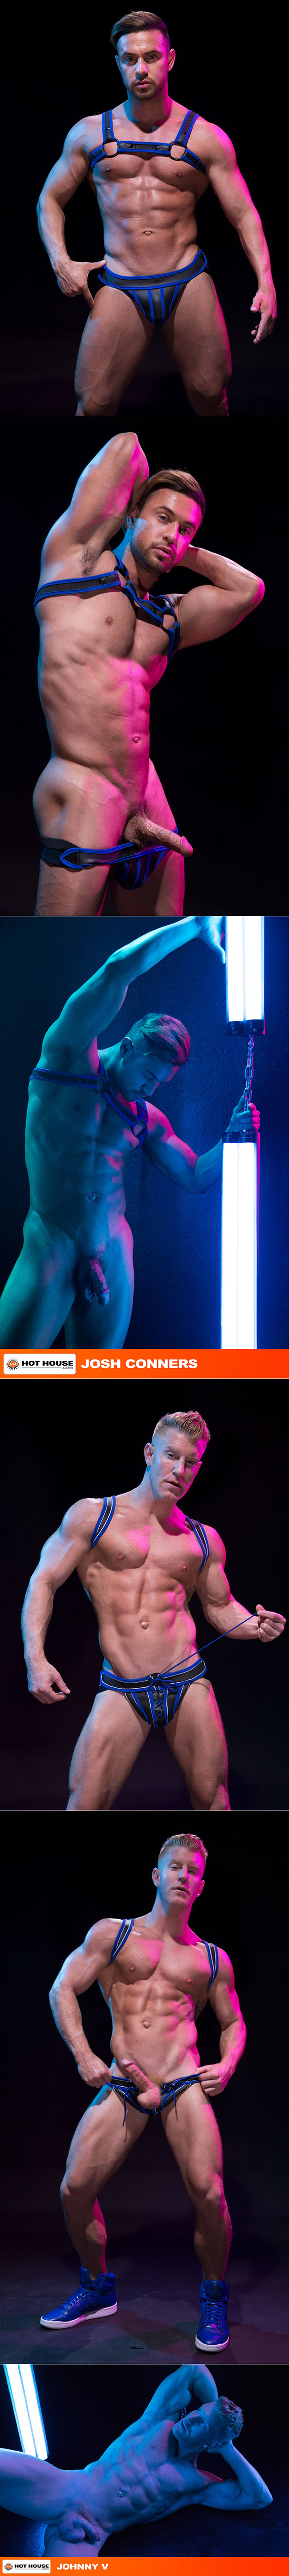 HotHouse: Johnny V pounds Josh Conners in "Get Lit"